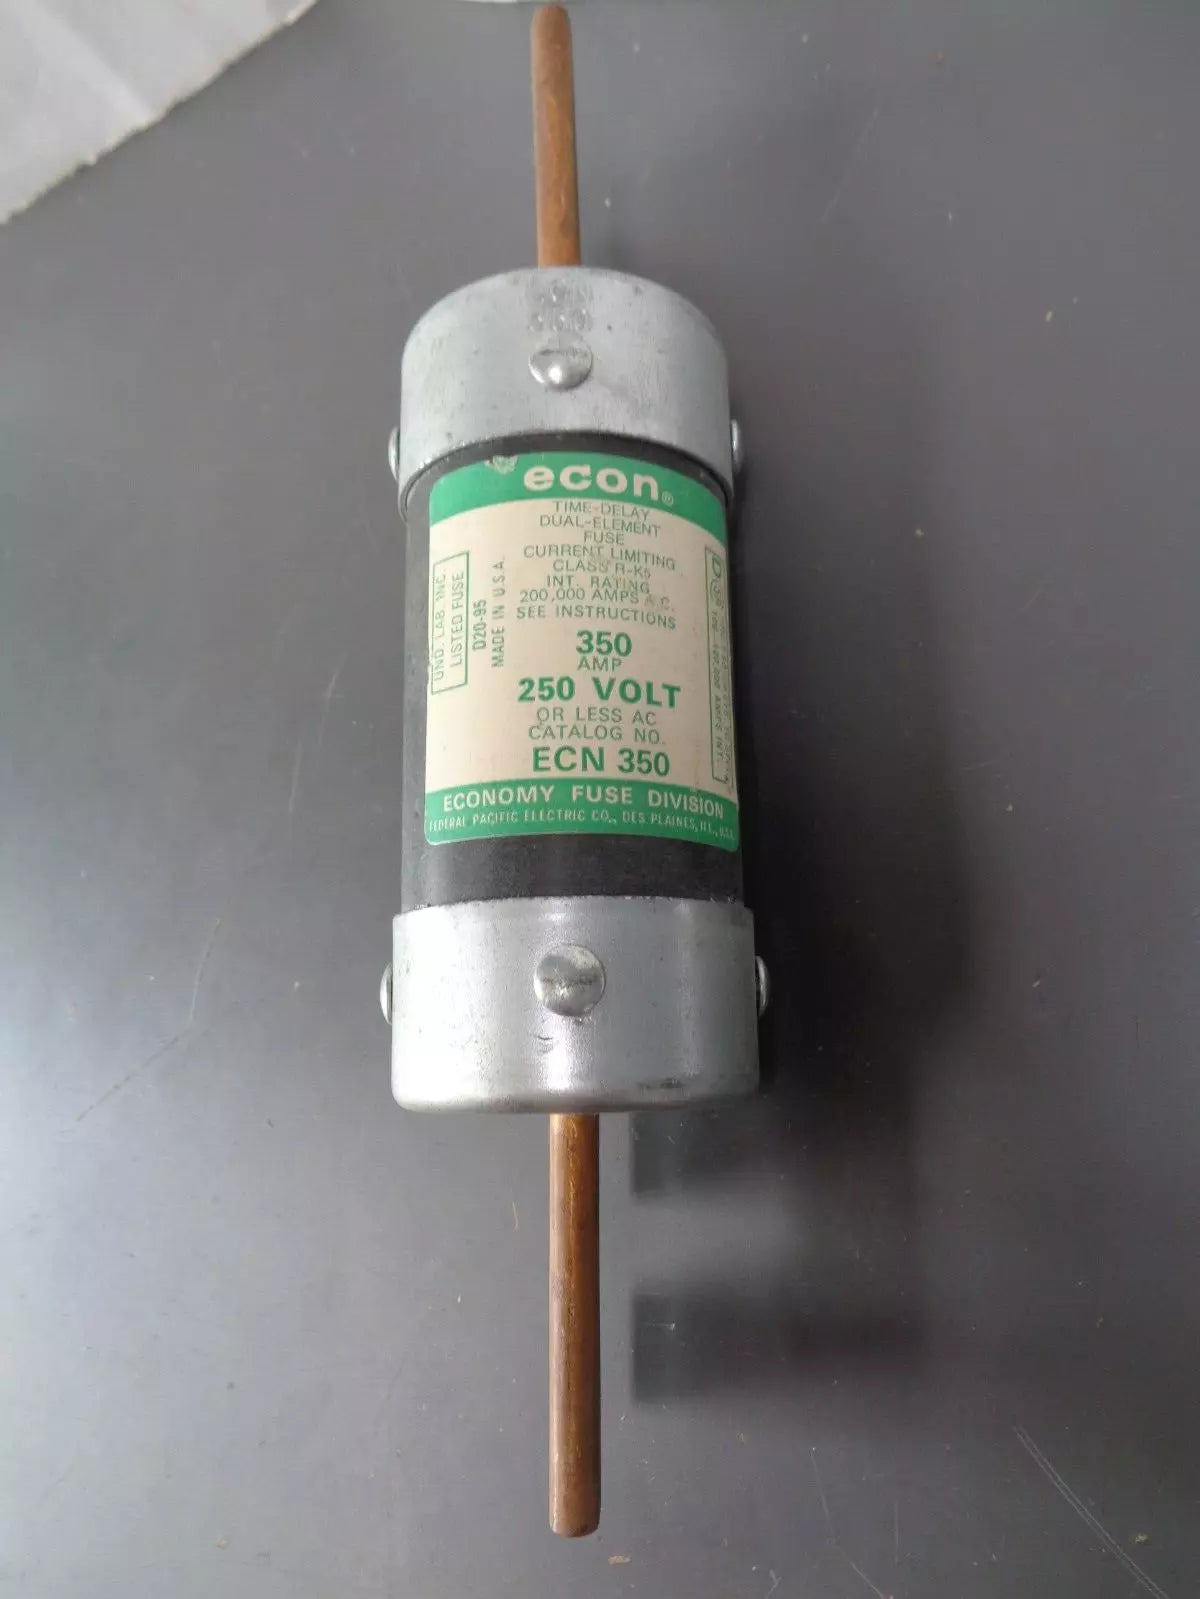 Econ ECN350 Dual Element Fuse 350 AMP 250V Class K5- Used